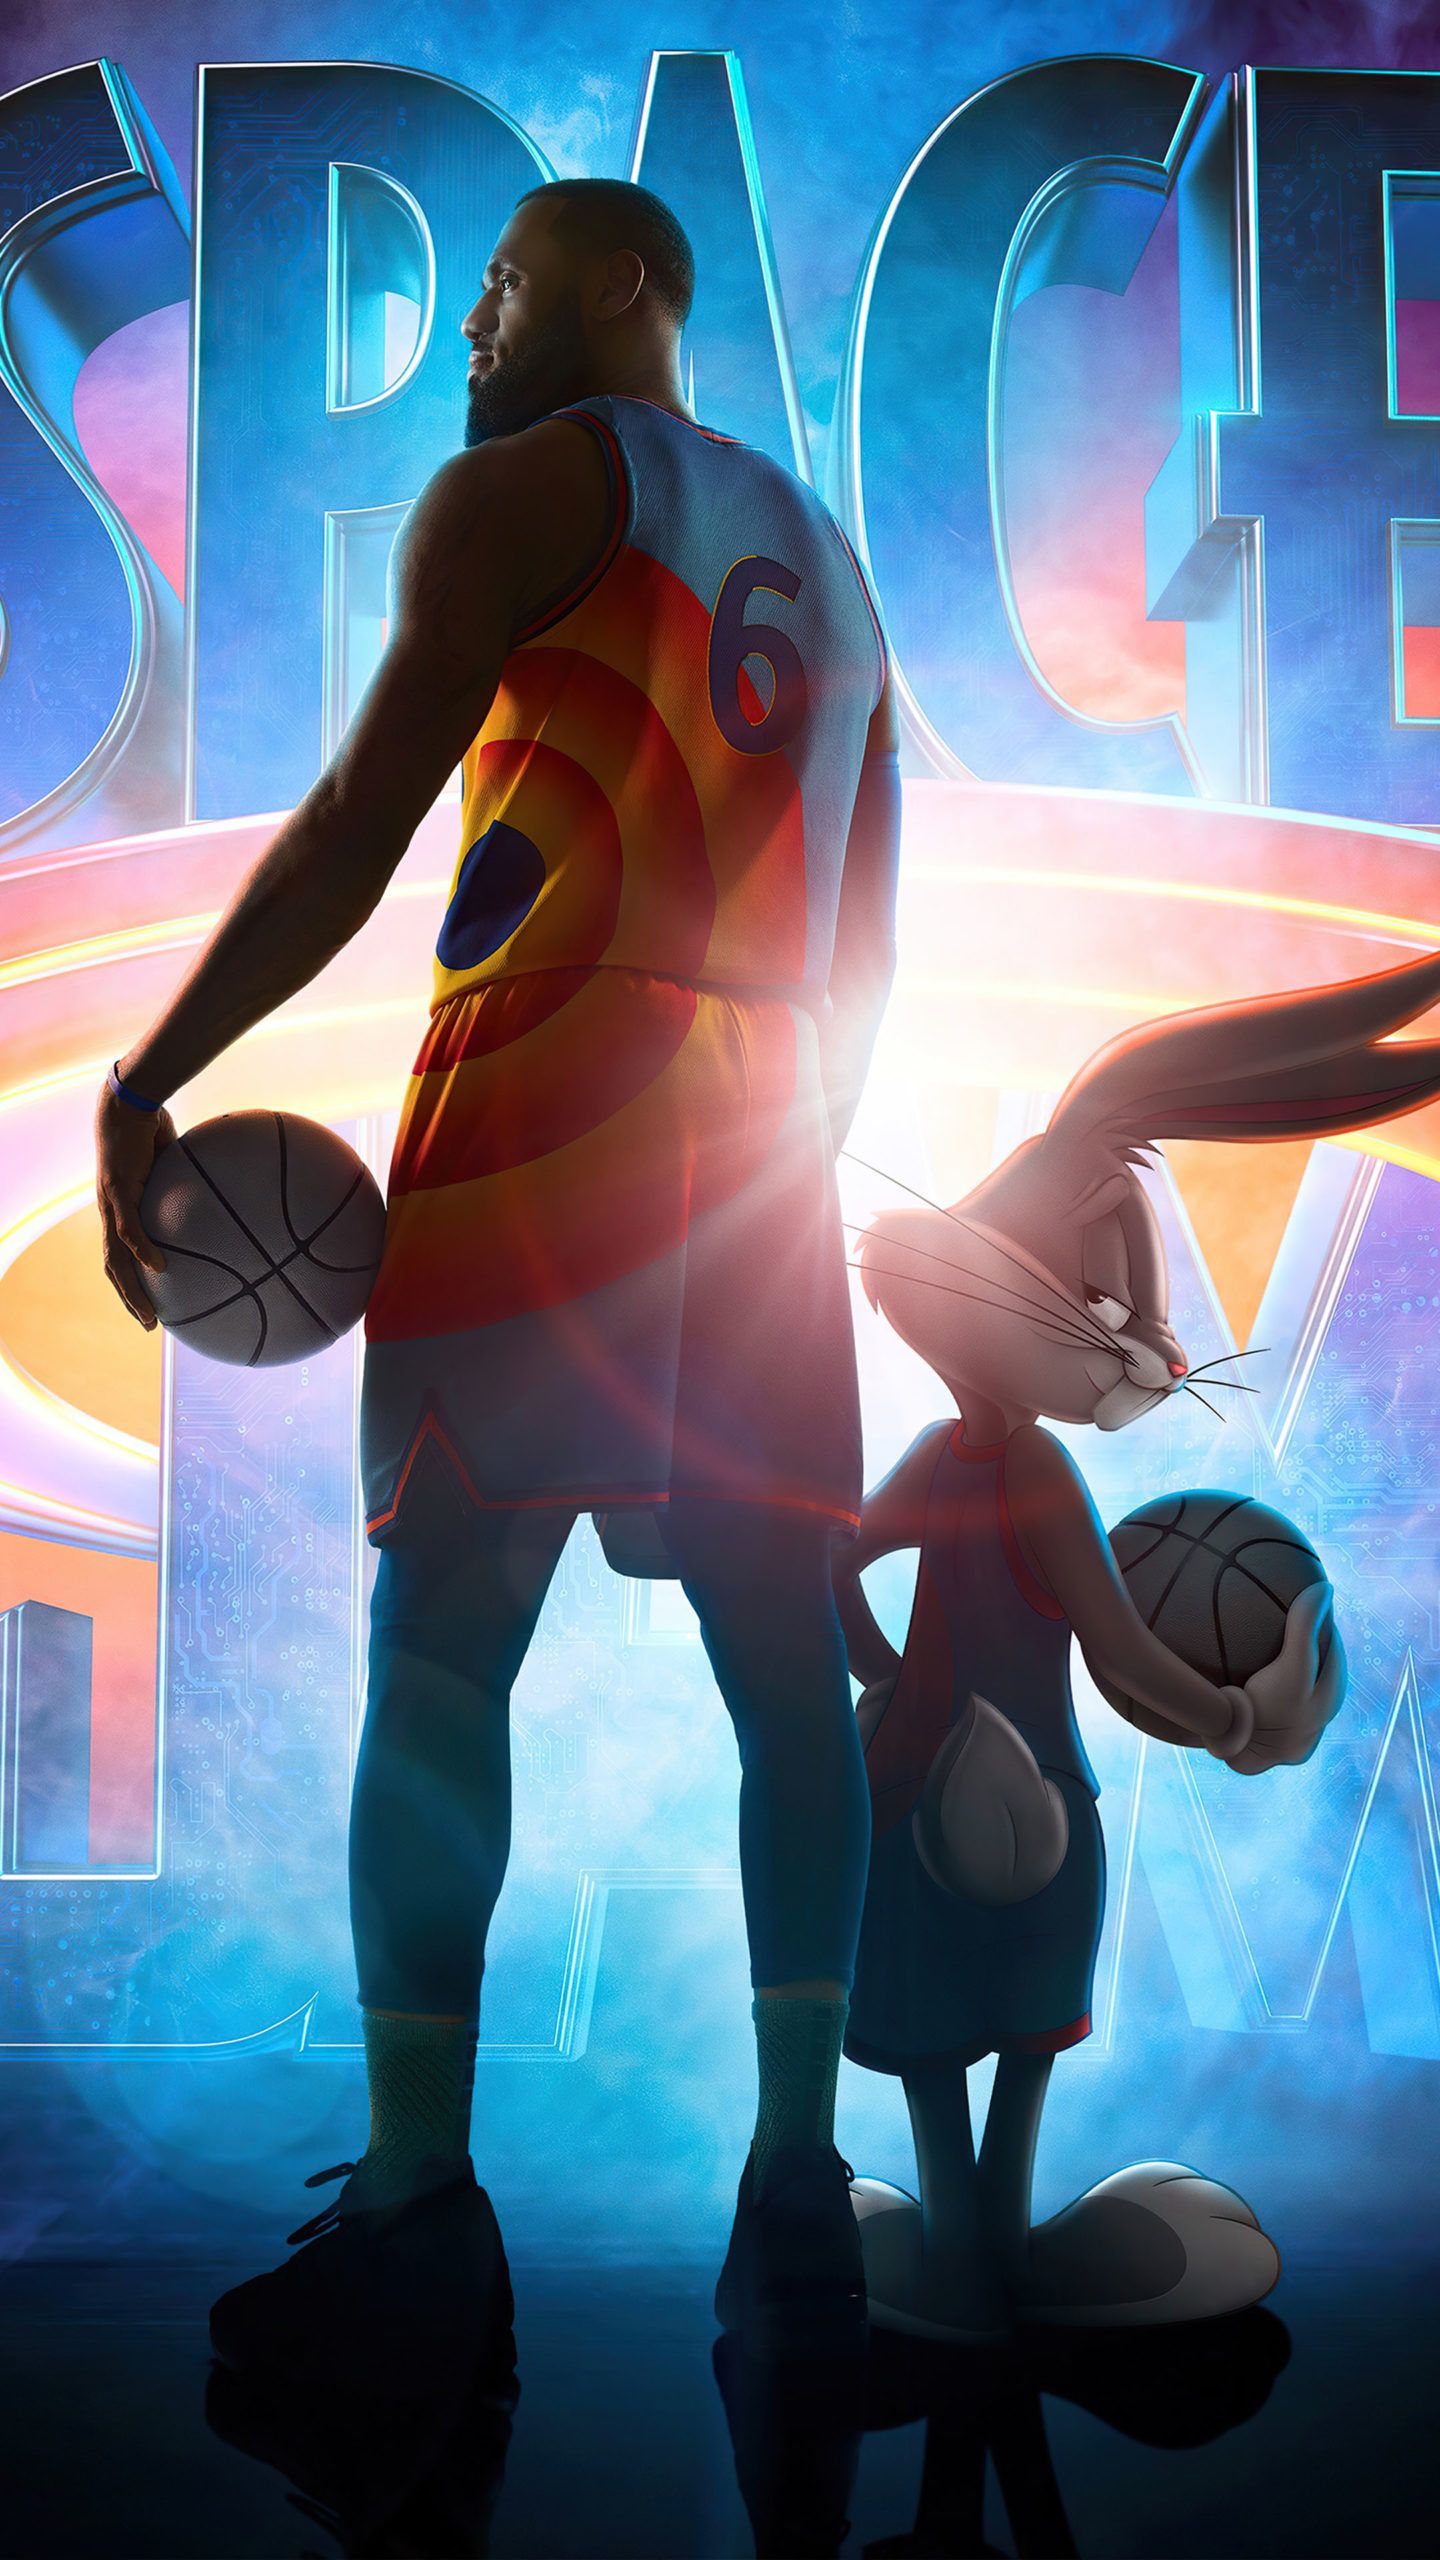 Space Jam A New Legacy Poster 4K Ultra HD Mobile Wallpaper. Space jam, Looney tunes space jam, Lebron james wallpaper